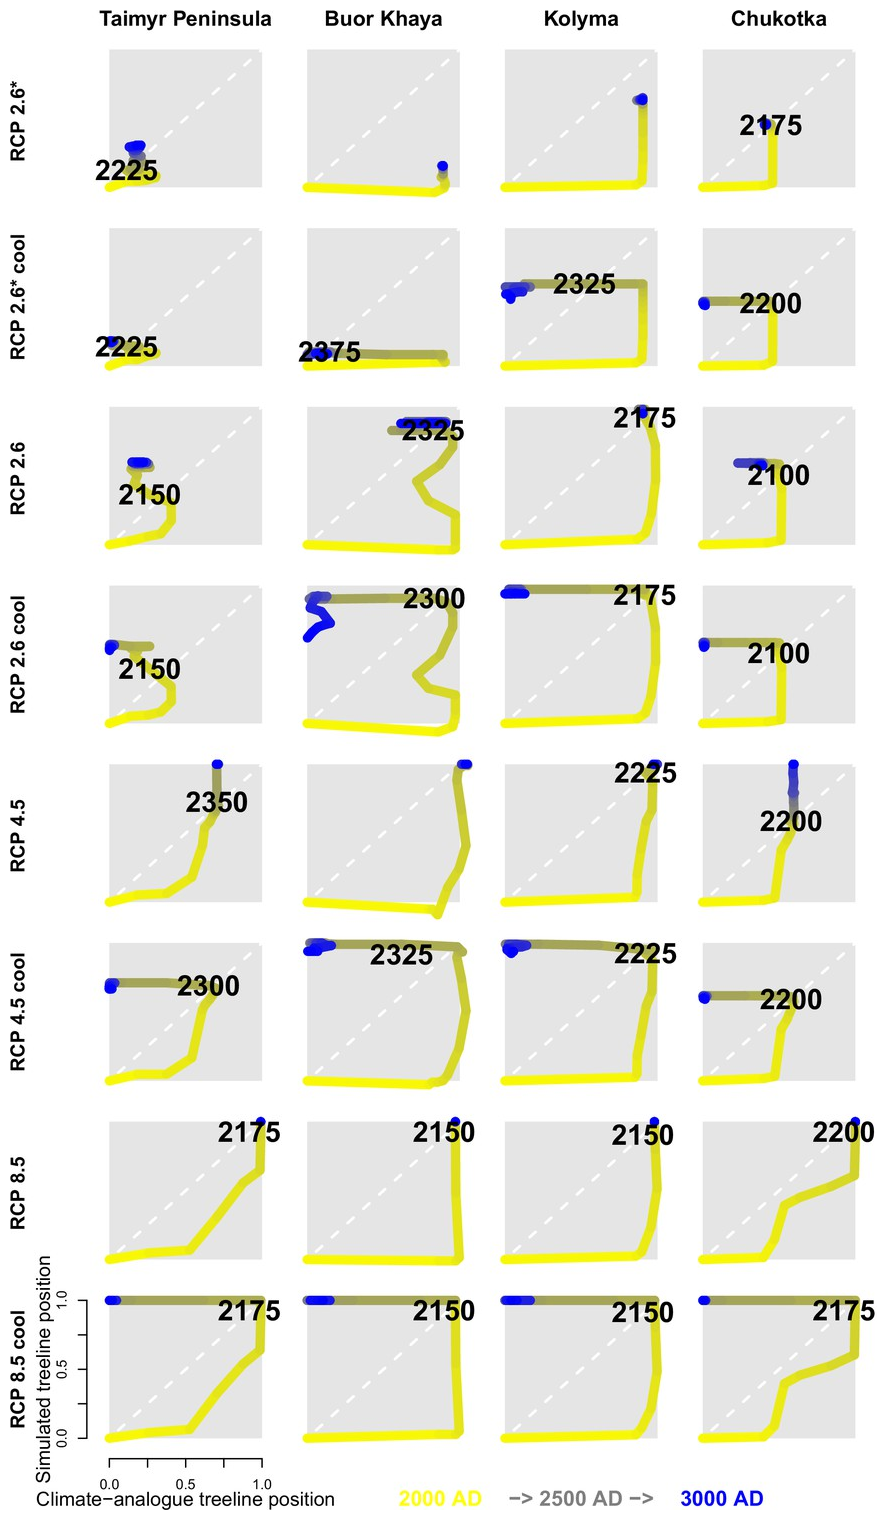 Treeline migration trajectories in four regions of Siberia, Taimyr Peninsula, Buor Khaya, Kolyma, and Chukotka. Numbers are the first year when the simulated treeline position is equal to or farther north than the modern climate-analogue position. Colour of line segments ranges from yellow for year 2000 to blue in 300 CE. Graphic: Kruse and Herzschuh, 2022 / eLife